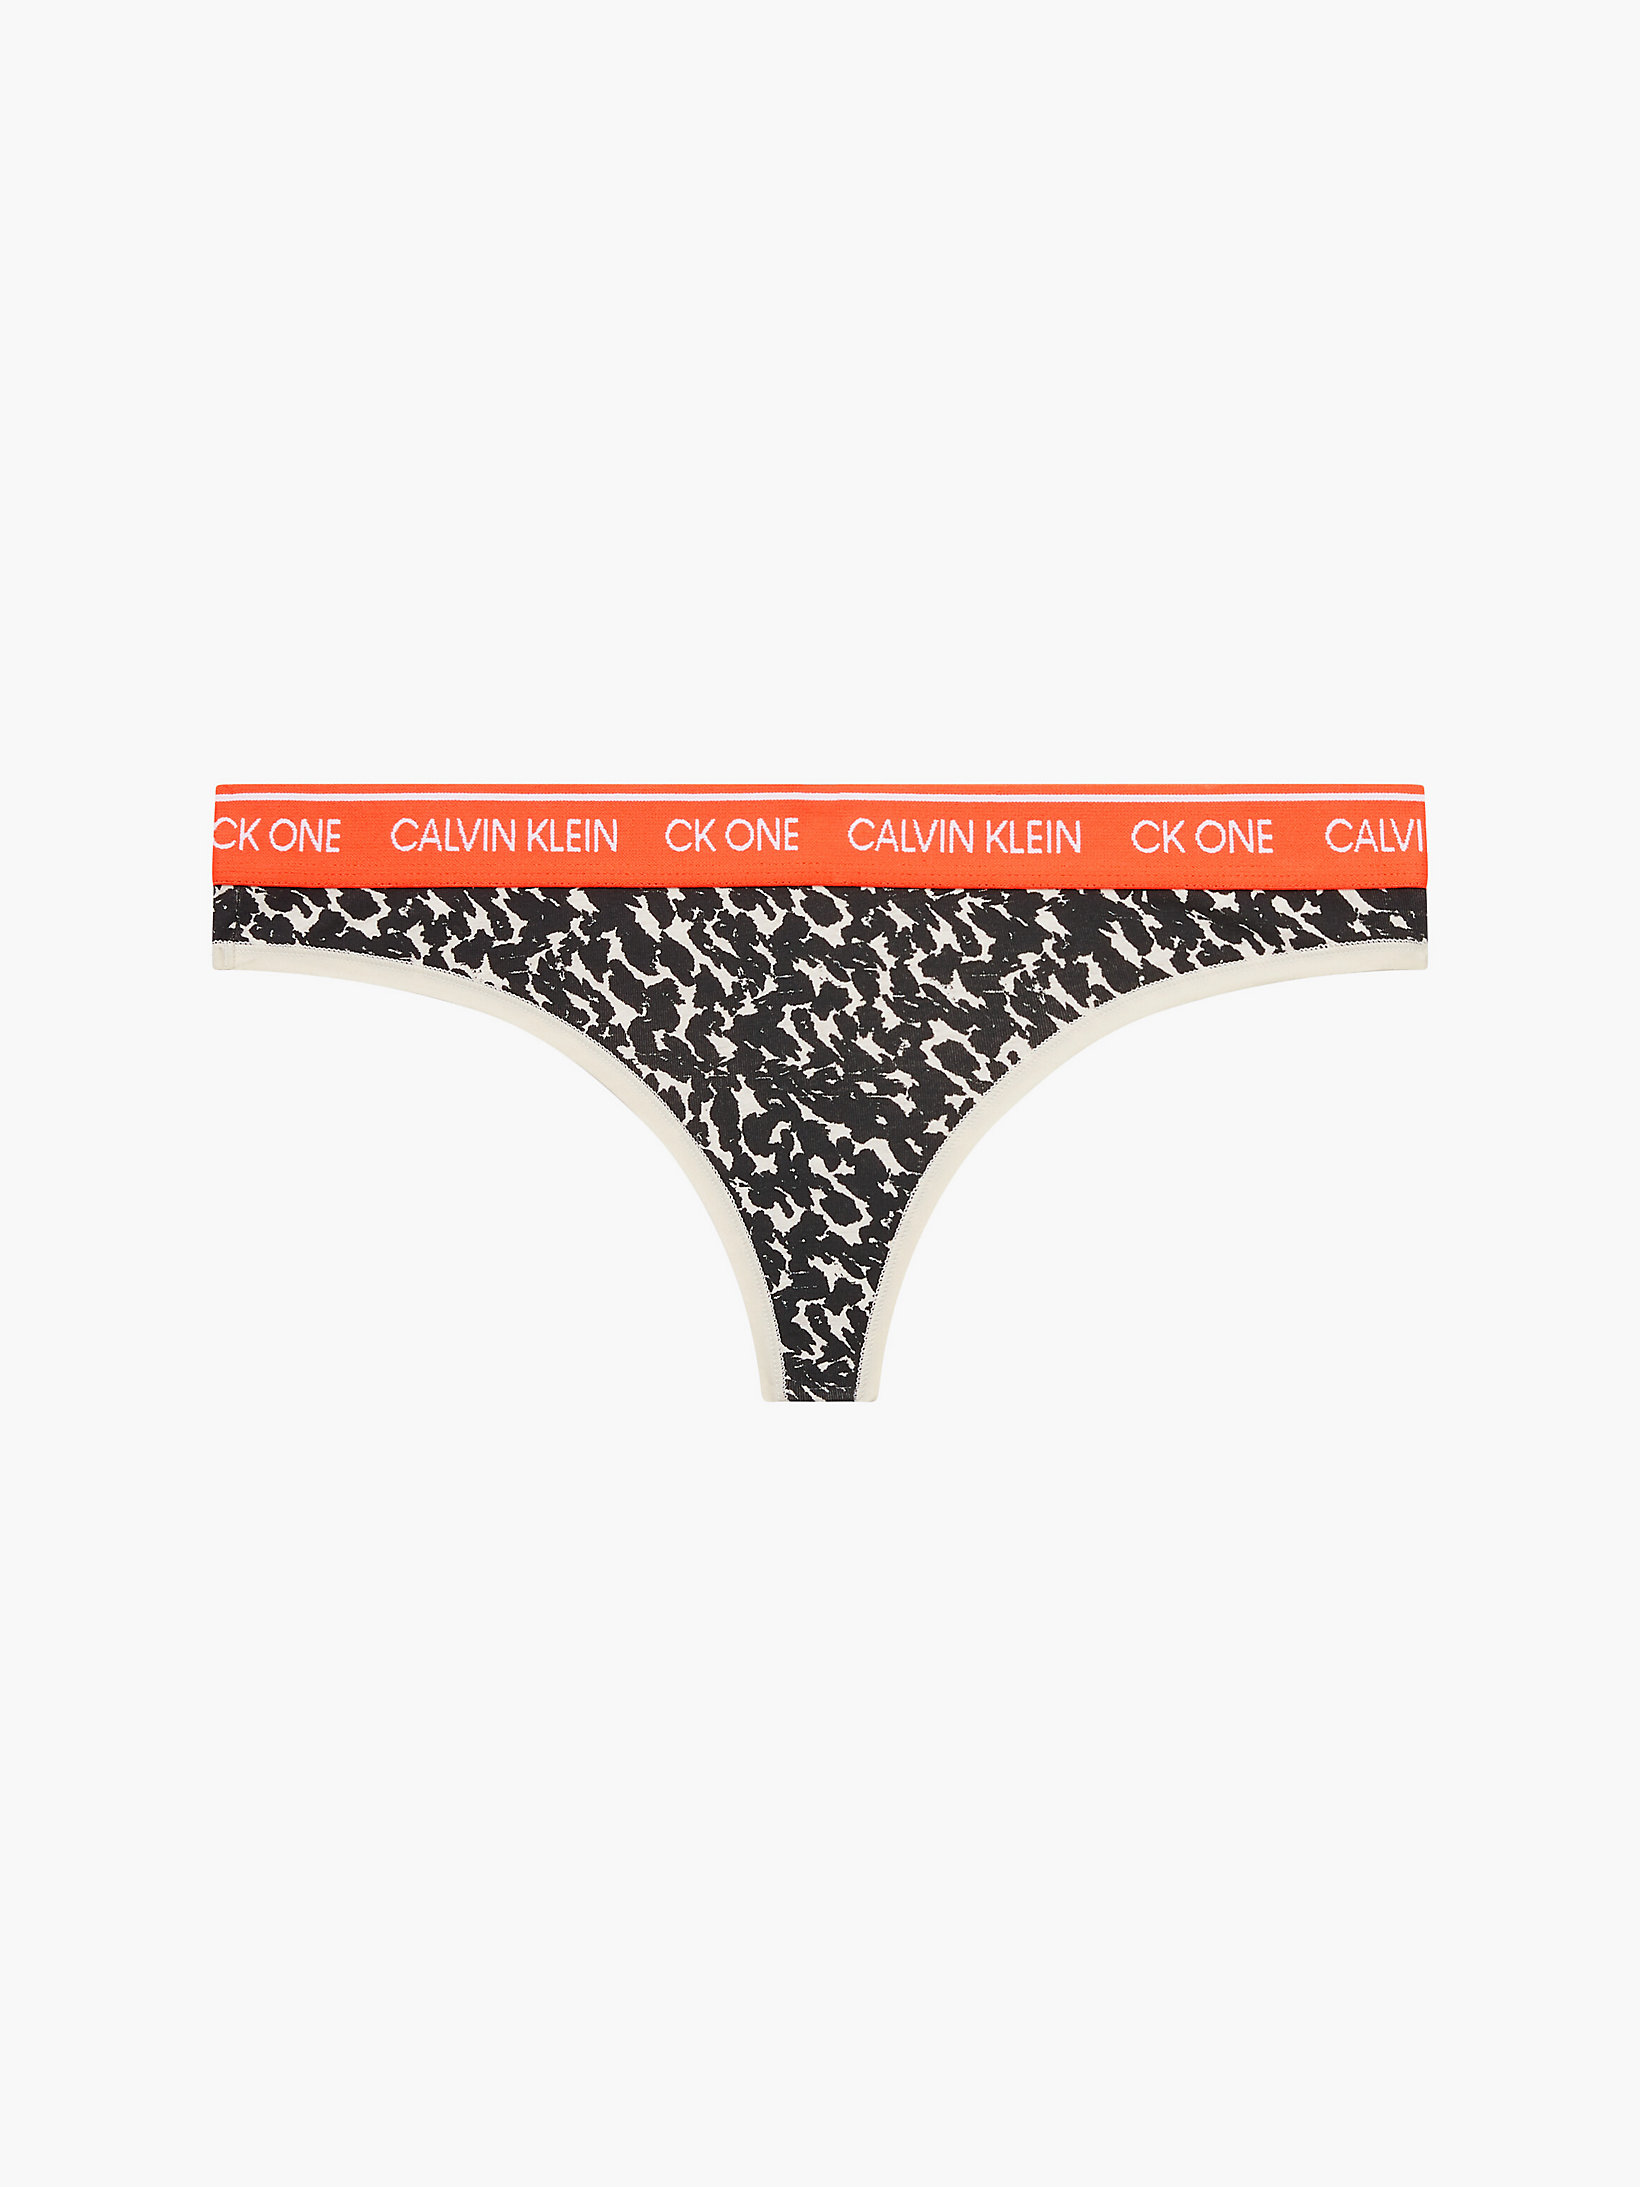 Distorted Animal - Oatmeal Heather Thong - CK One undefined women Calvin Klein